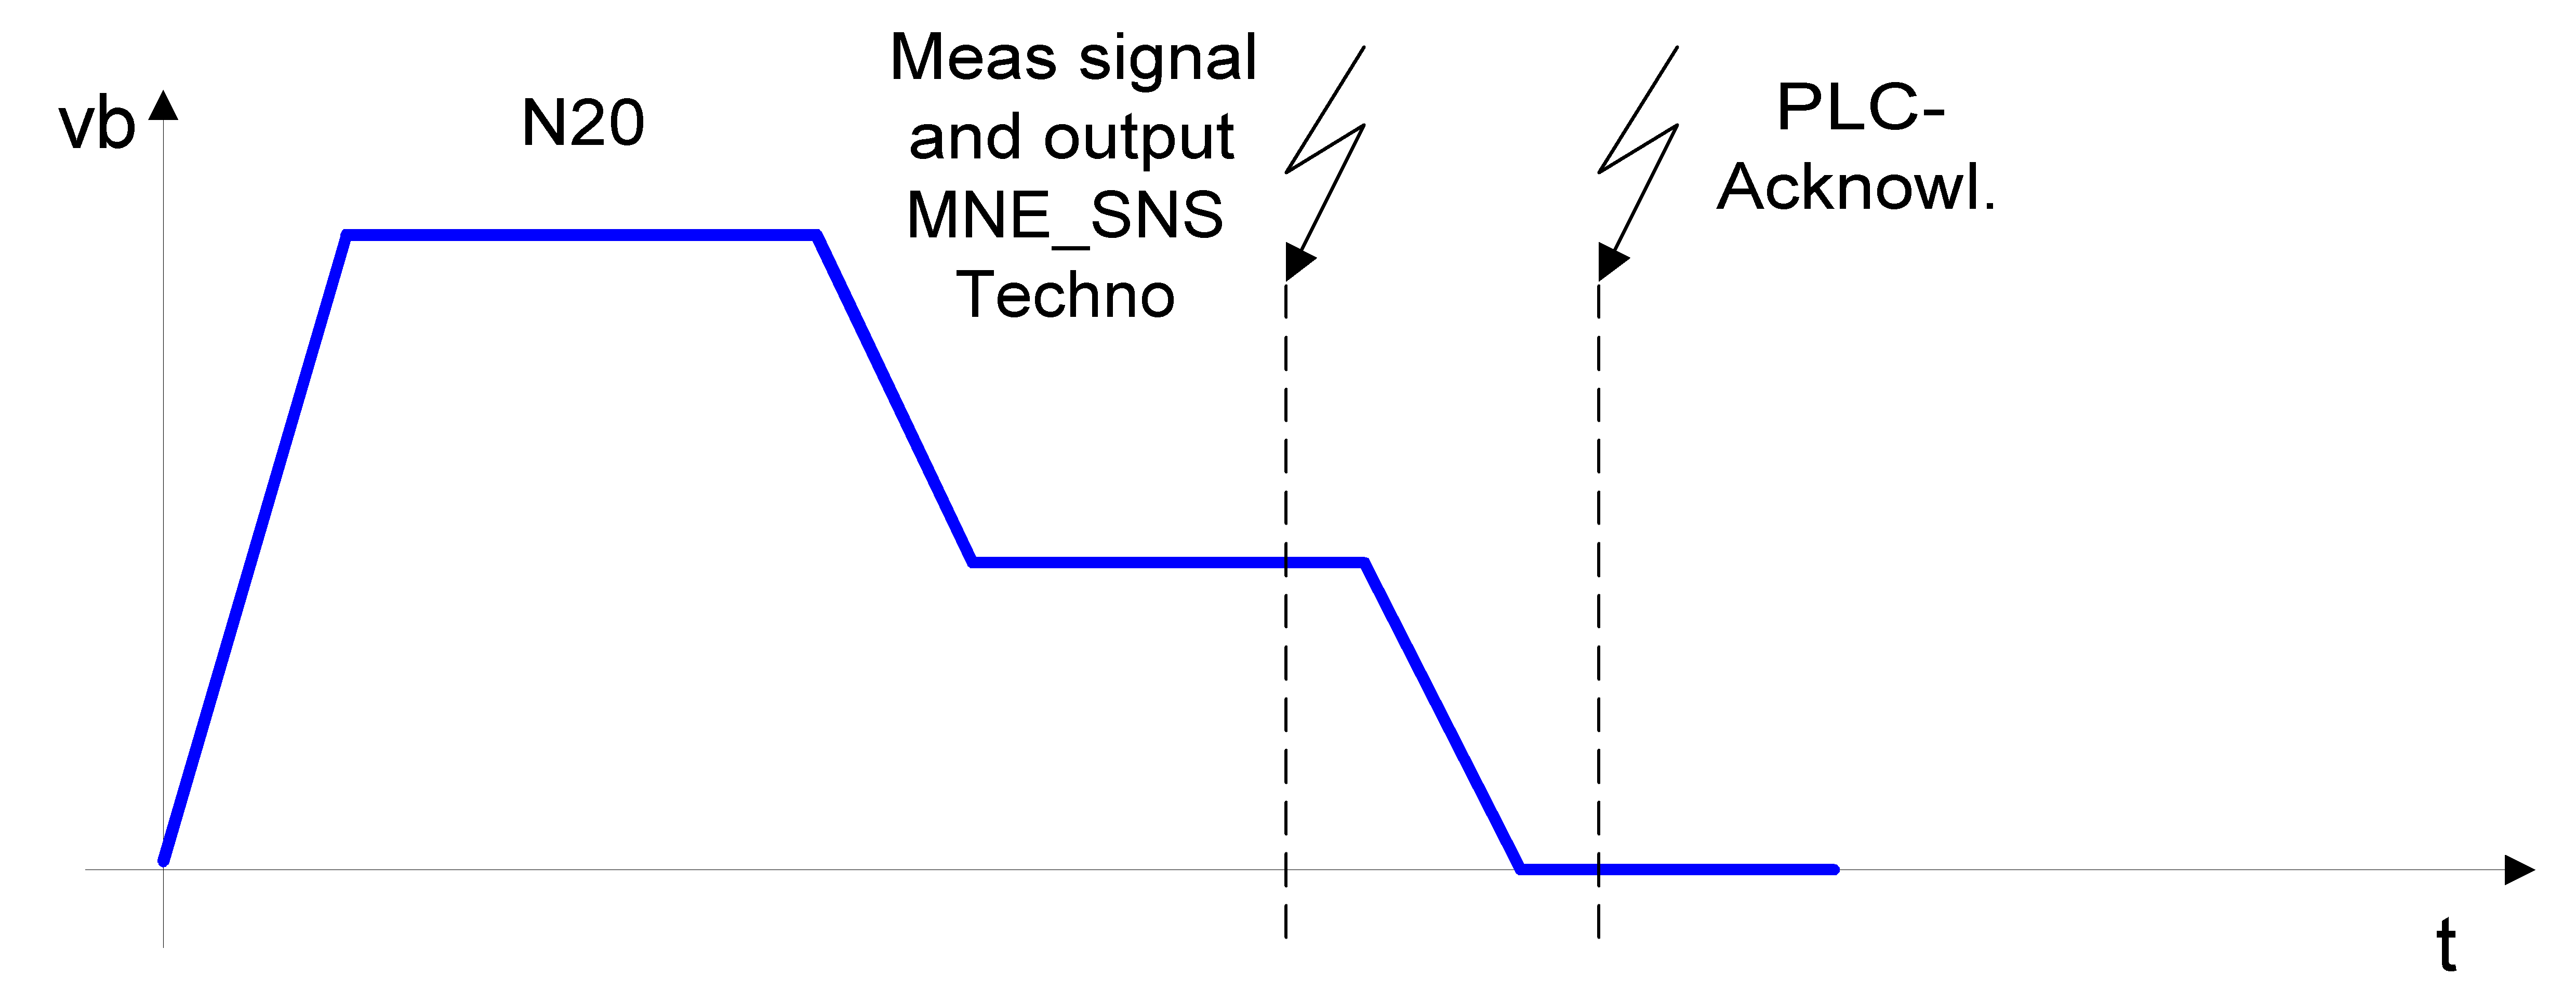 Output M function directly after measuring signal (P-CHAN-00435 = 1)